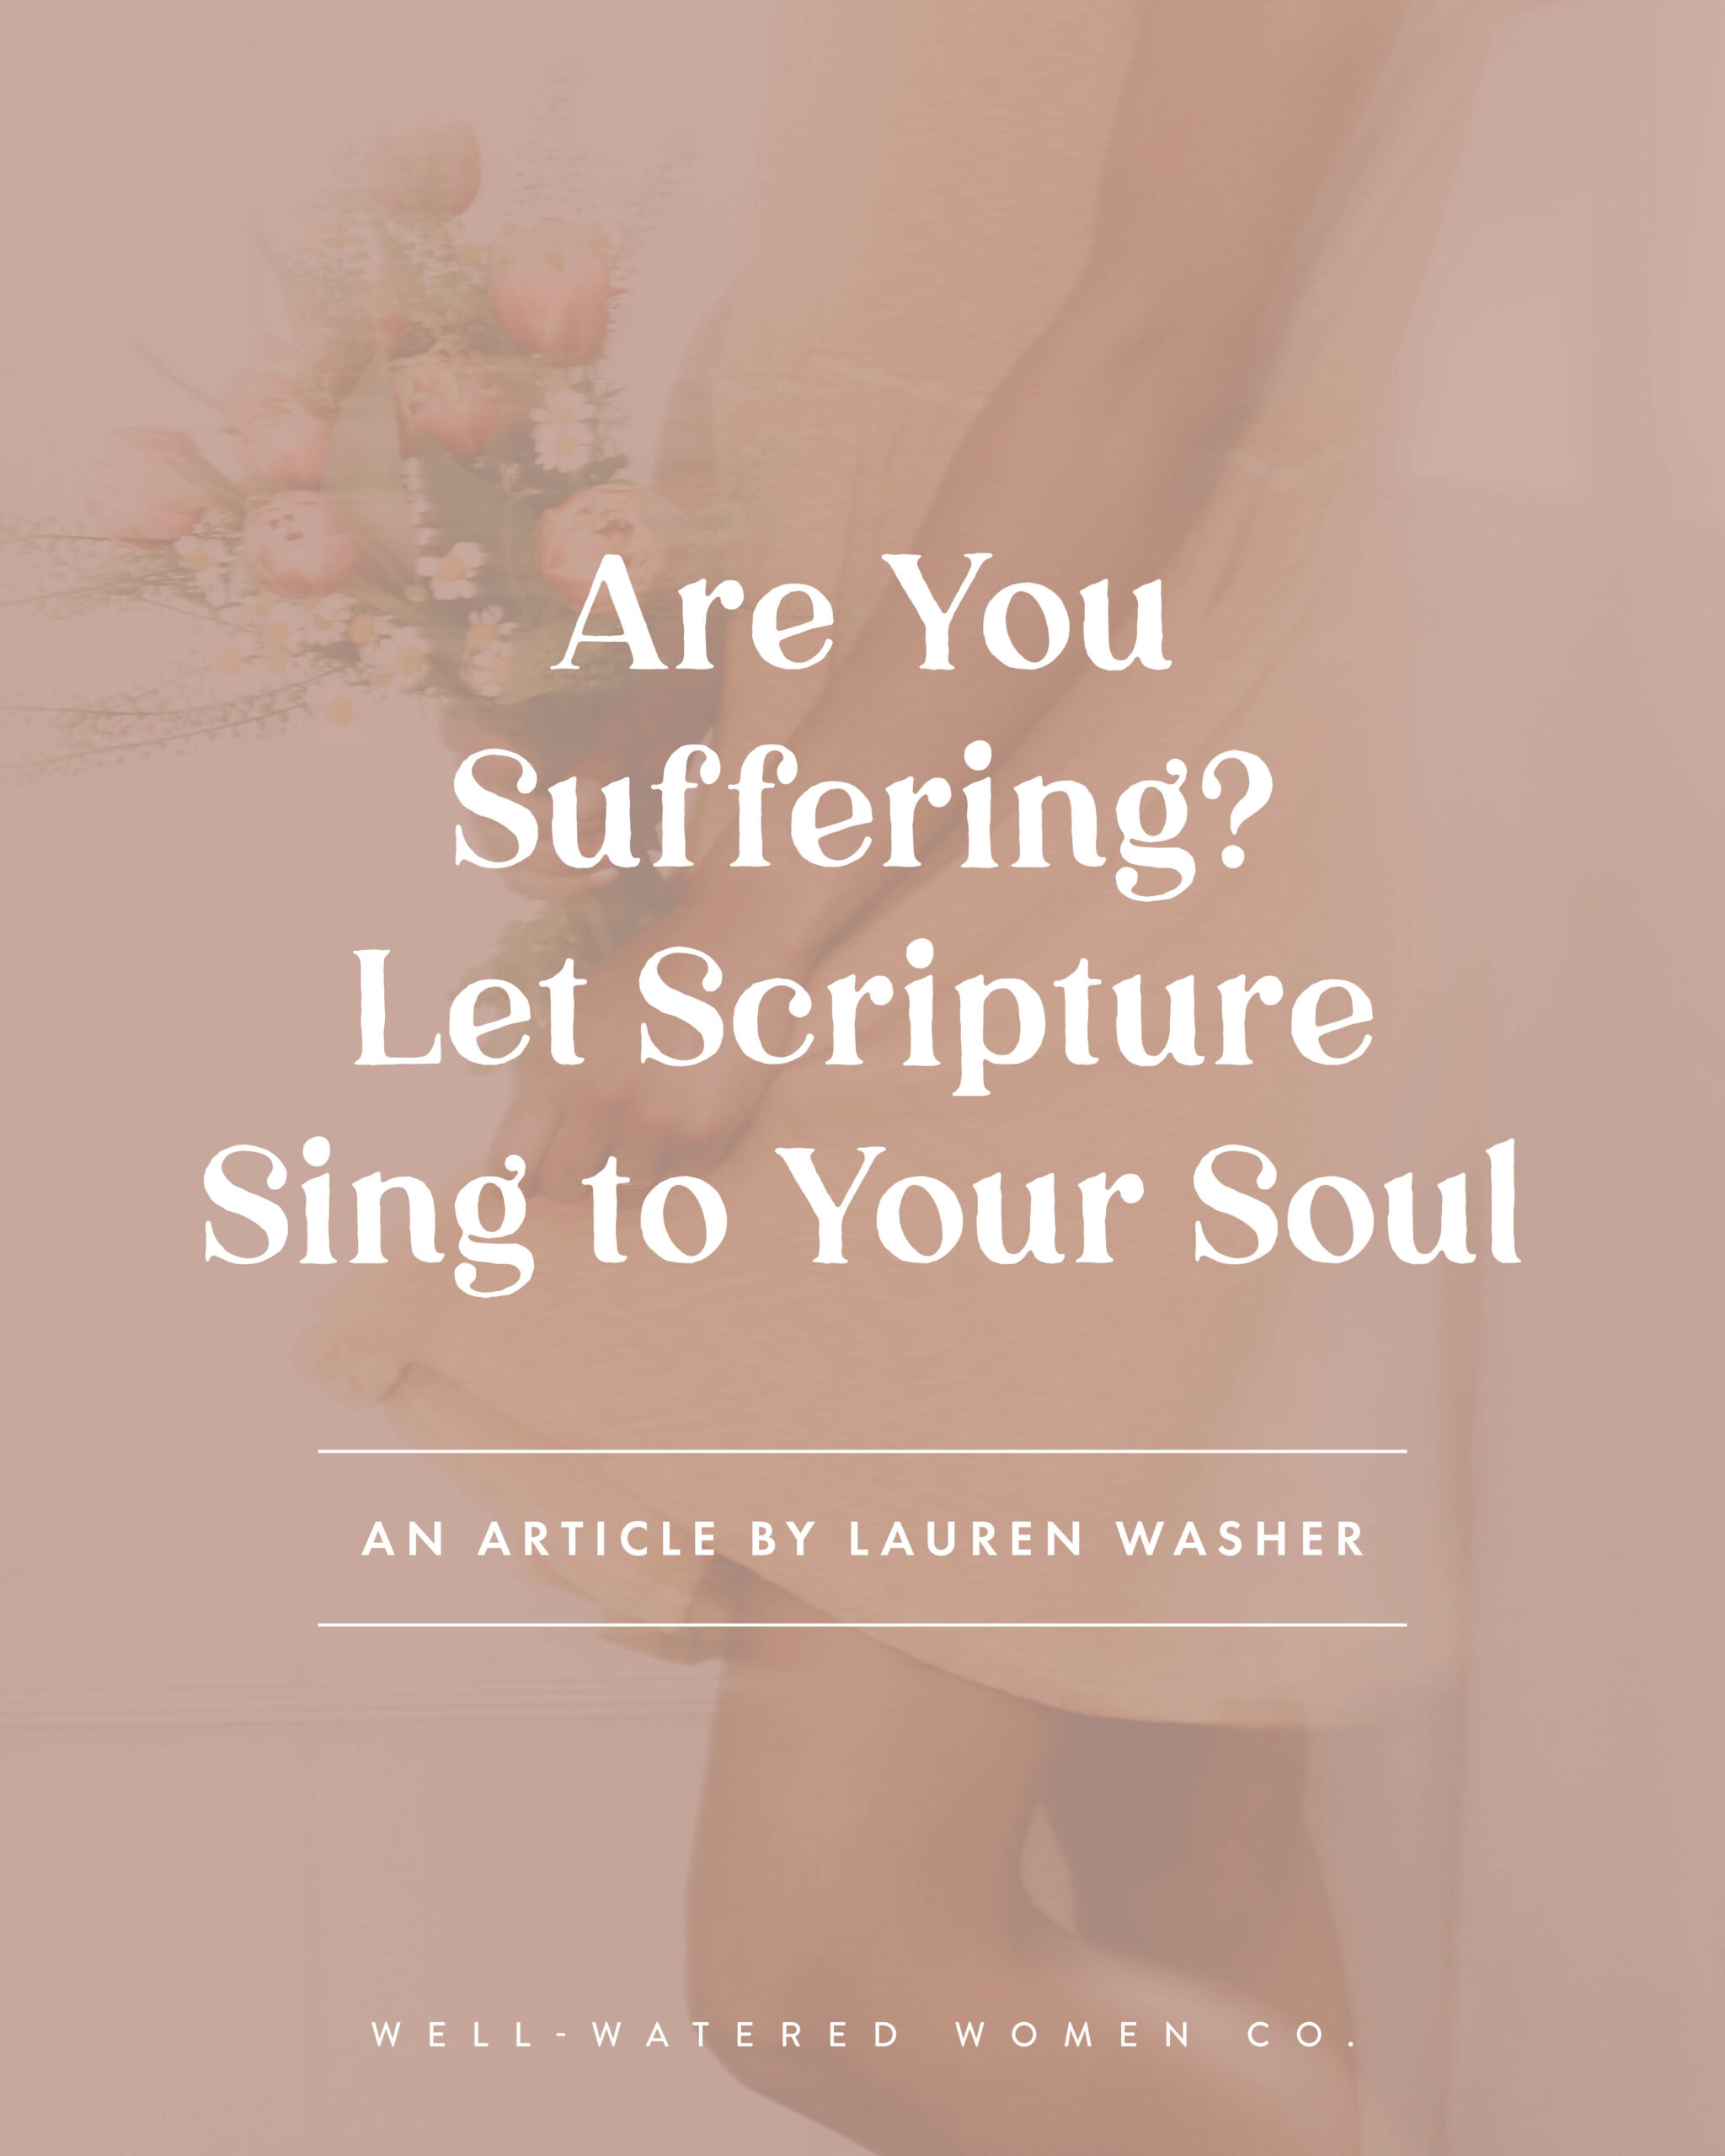 Are You Suffering? Let Scripture Sing to Your Soul - an article from Well-Watered Women